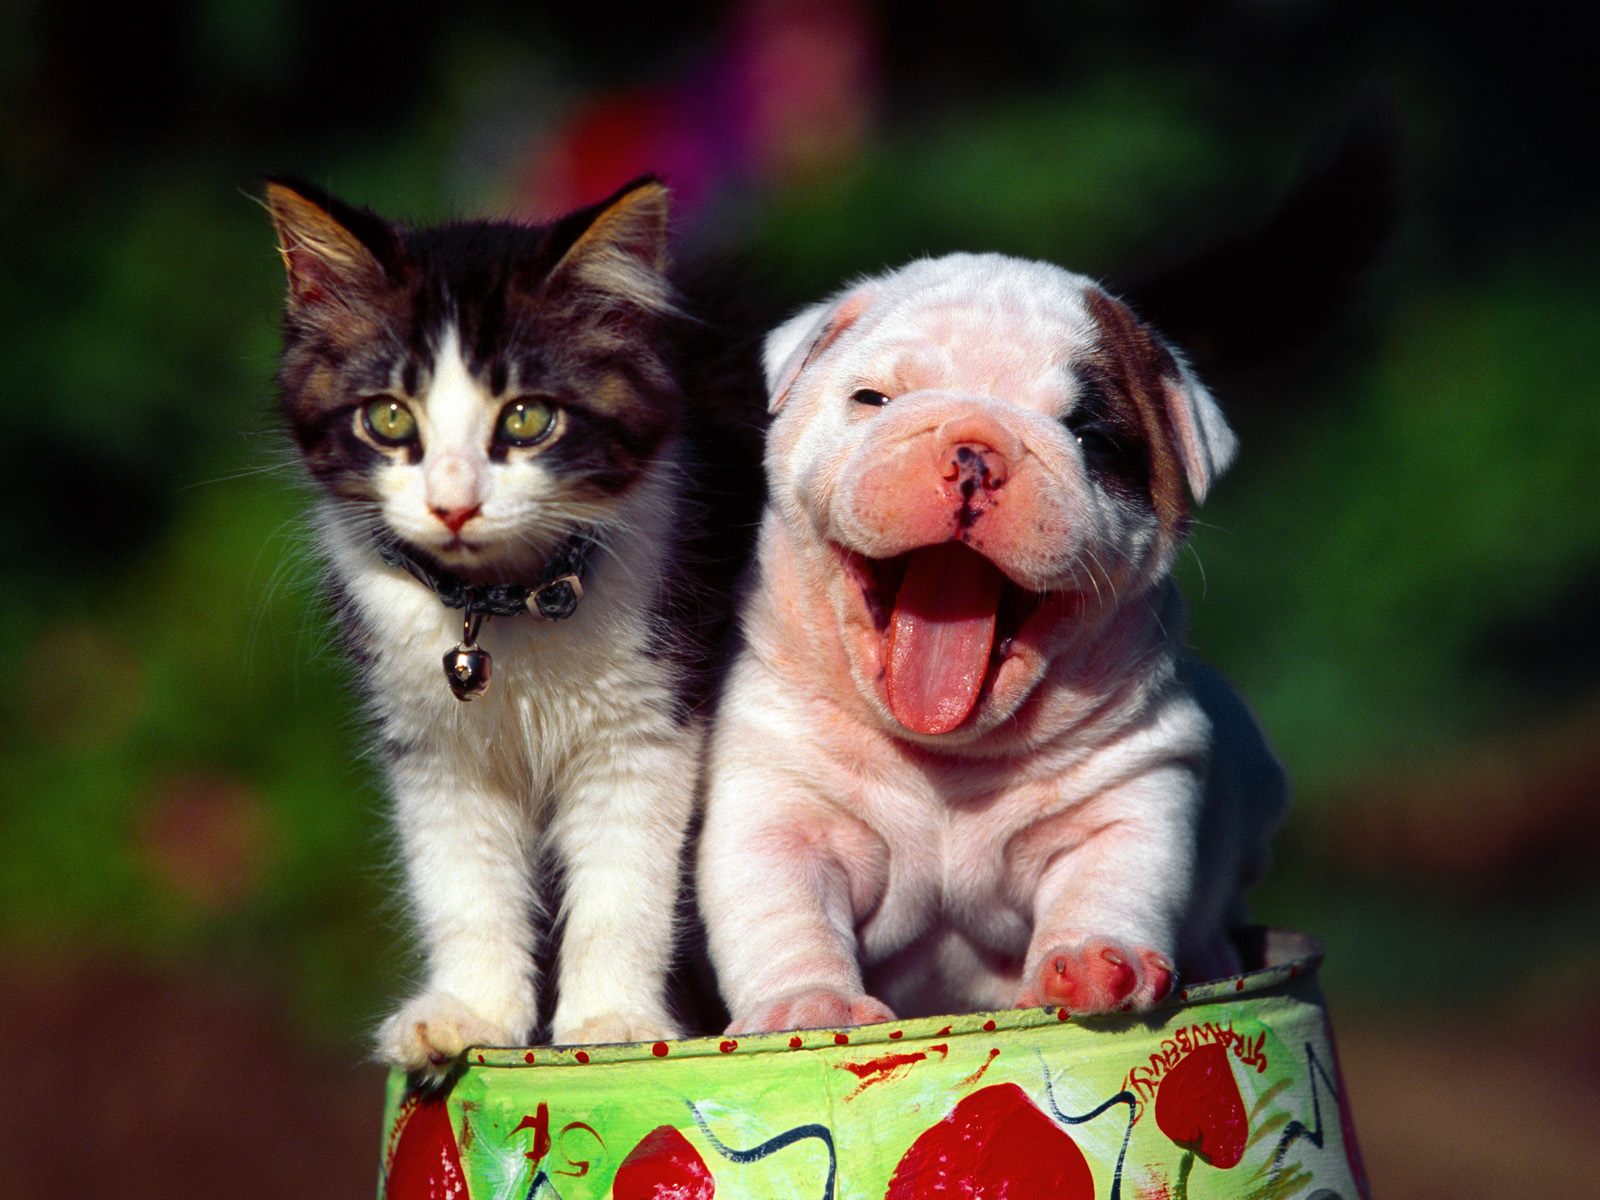 Cute Cat And Dog Wallpapers For Desktop In Hd - PetPictures